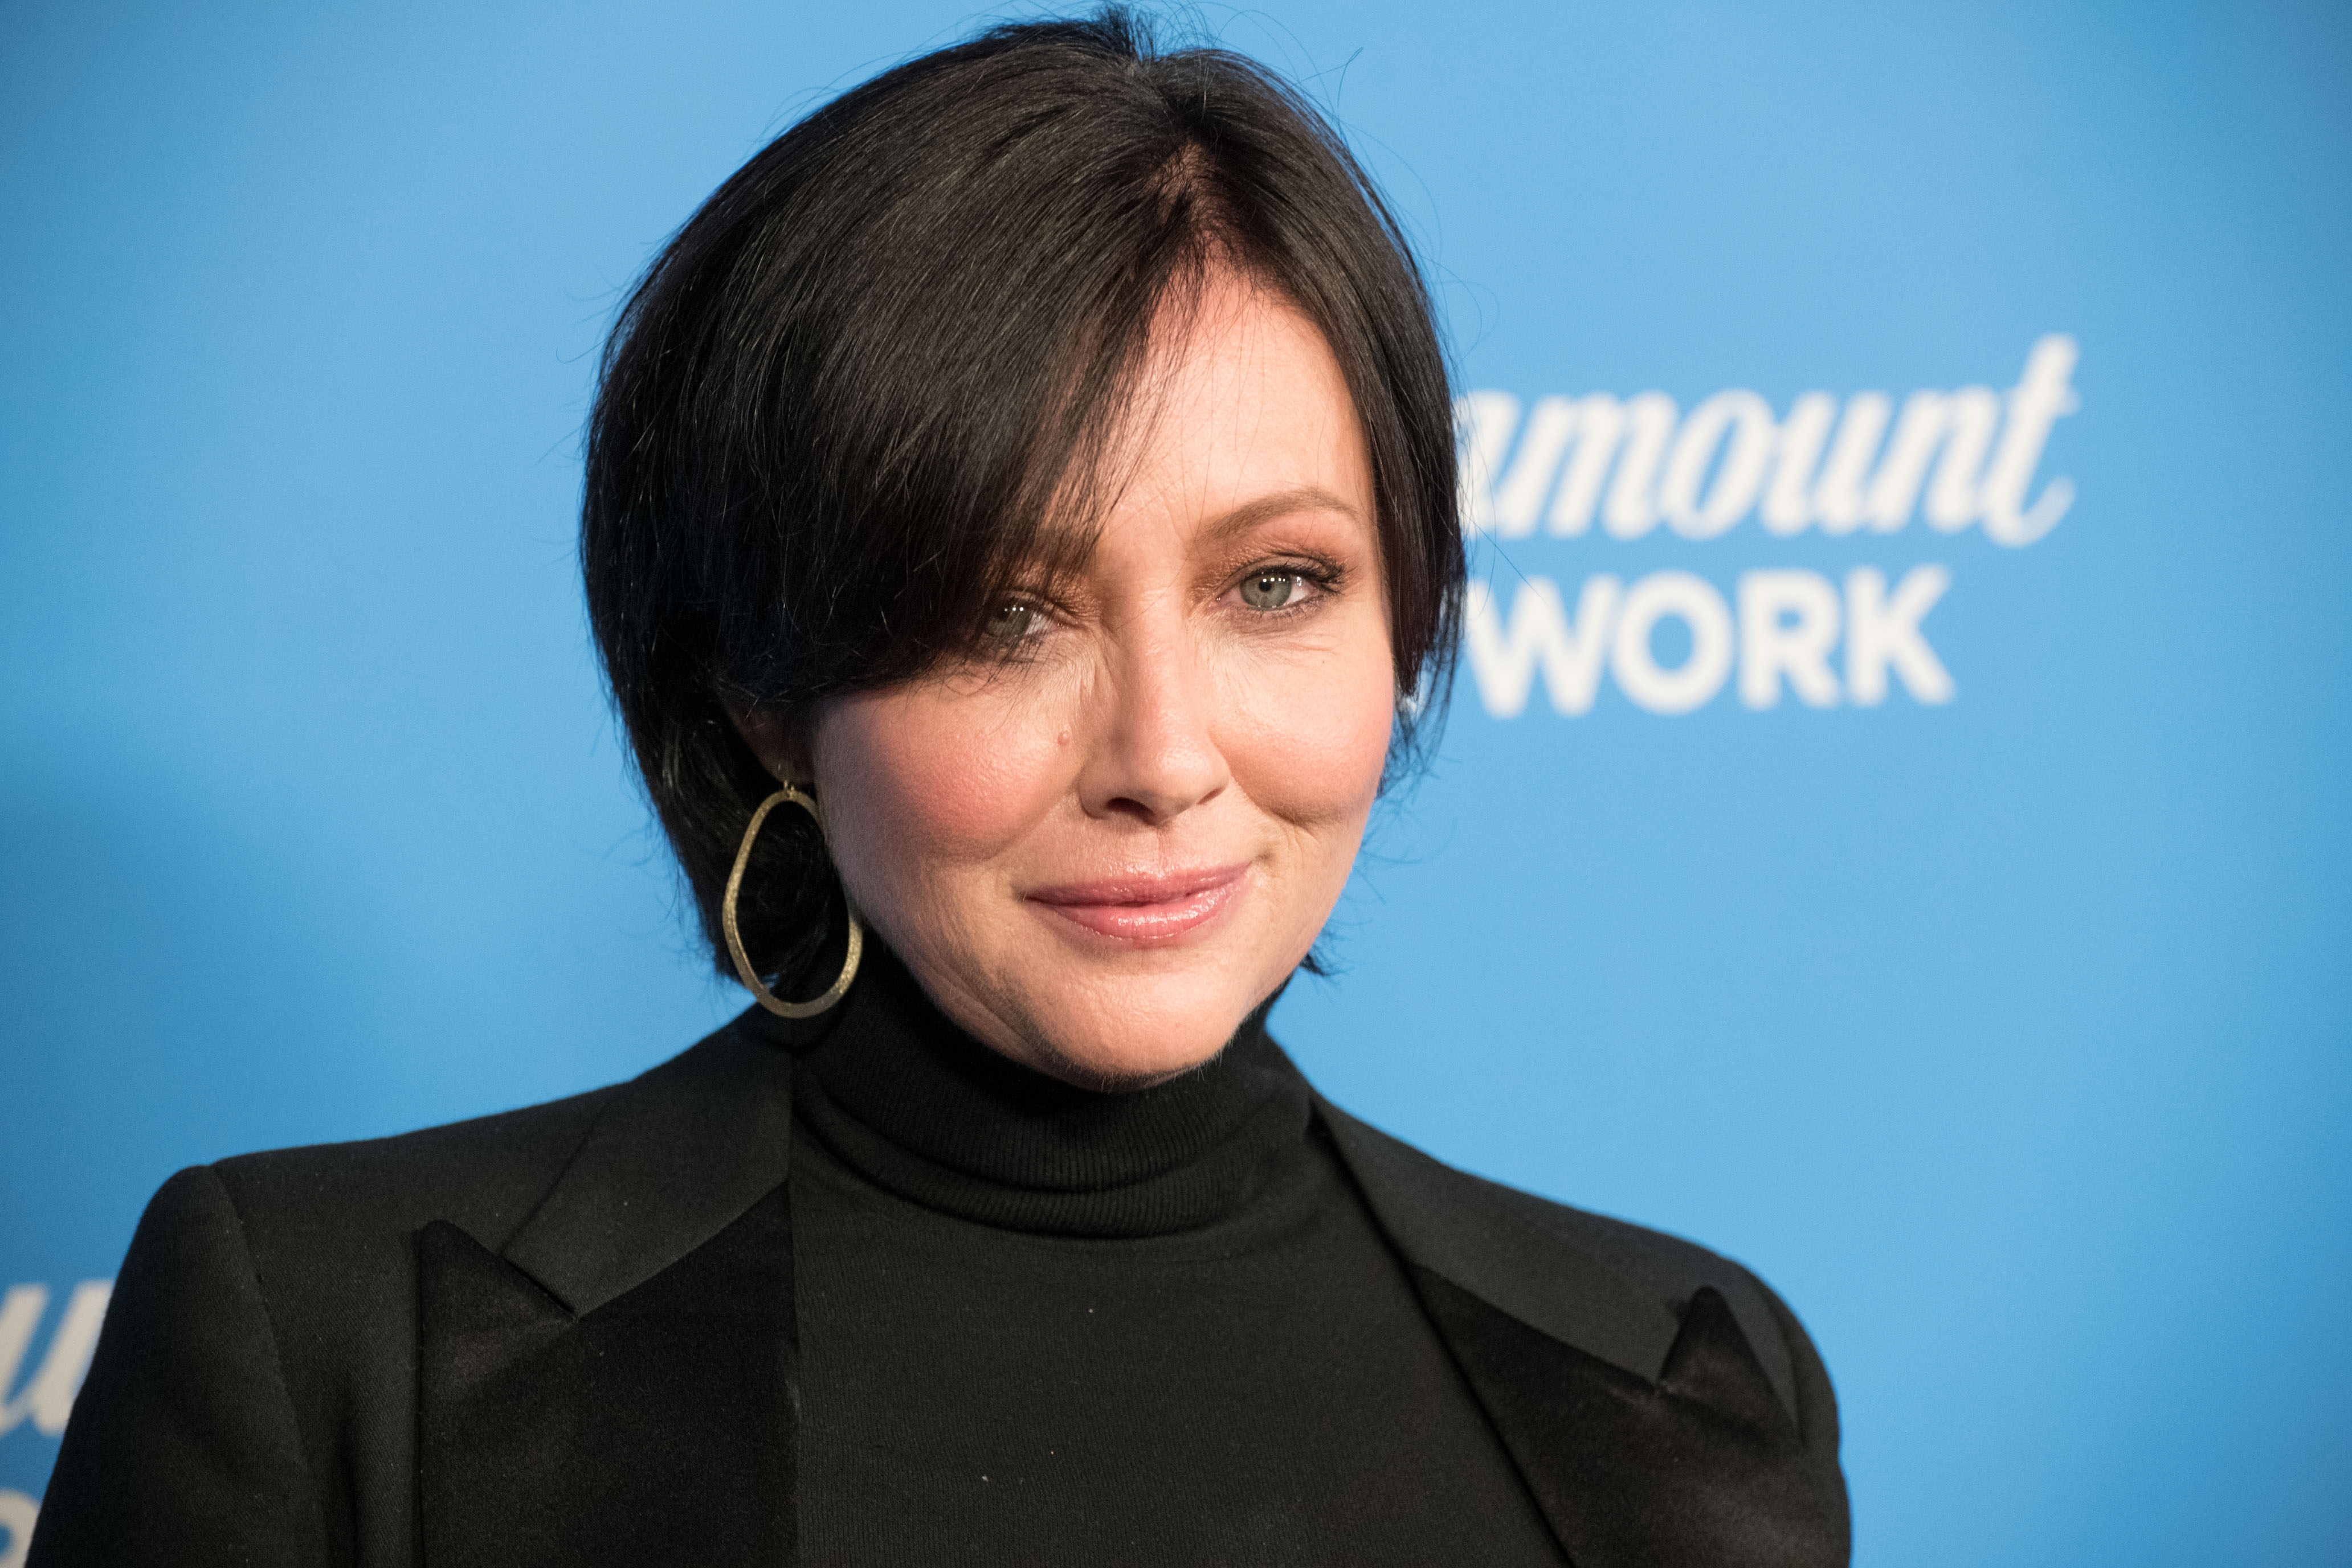 Shannen Doherty attending the Paramount Network Launch Party at Sunset Tower in Los Angeles, California on January 18, 2018 | Source: Getty Images